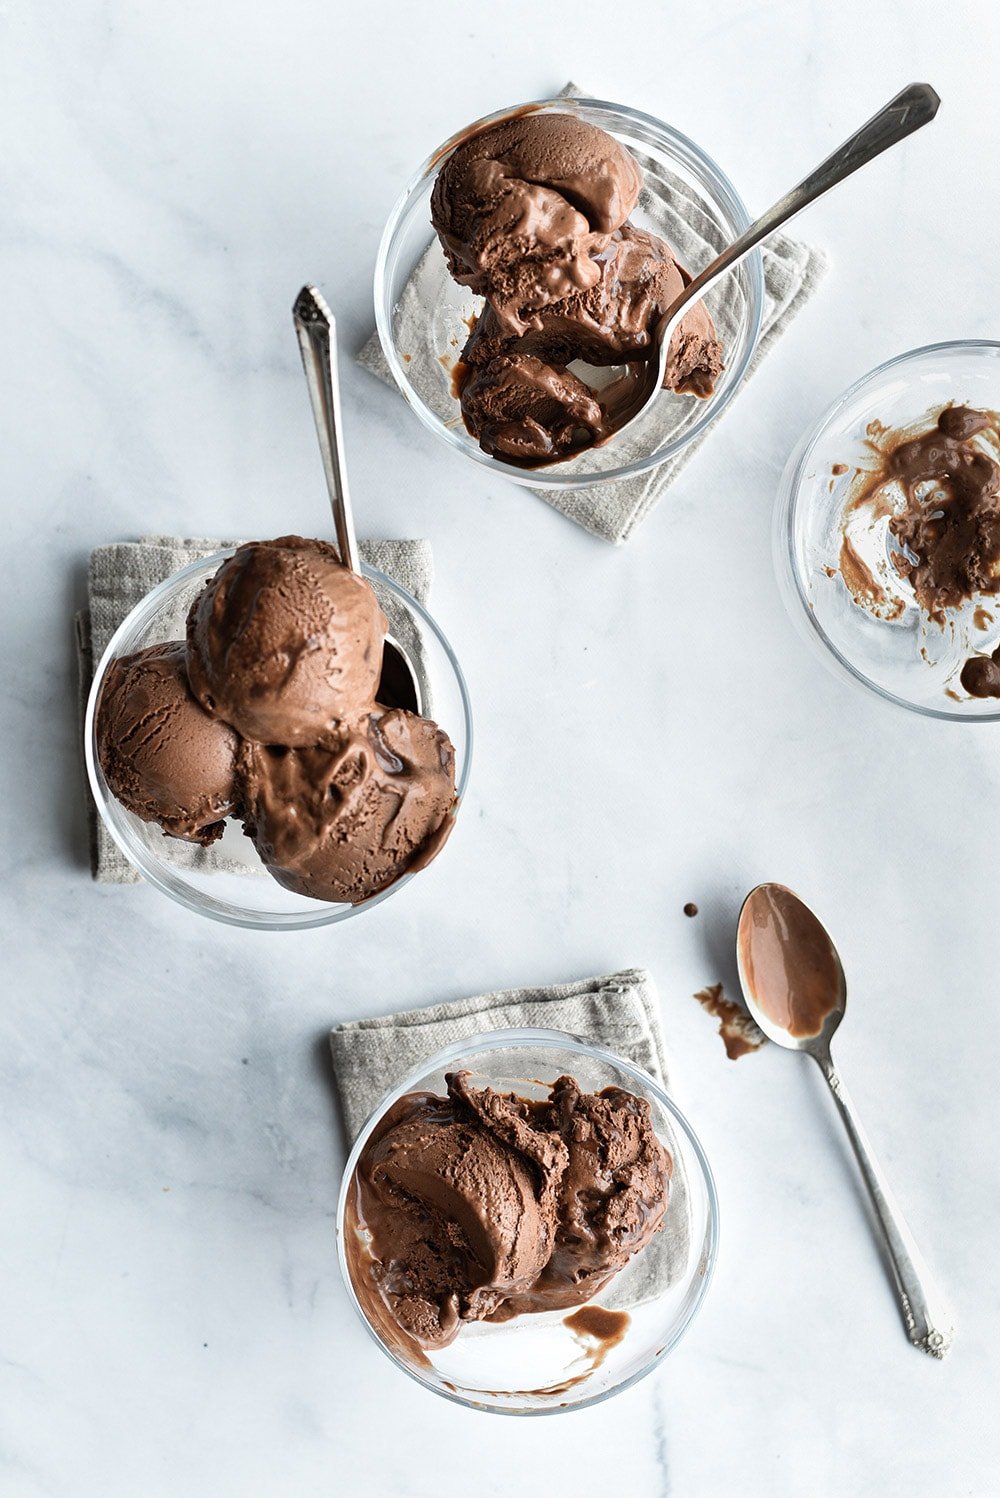 scoops of chocolate ice cream in 3 bowls